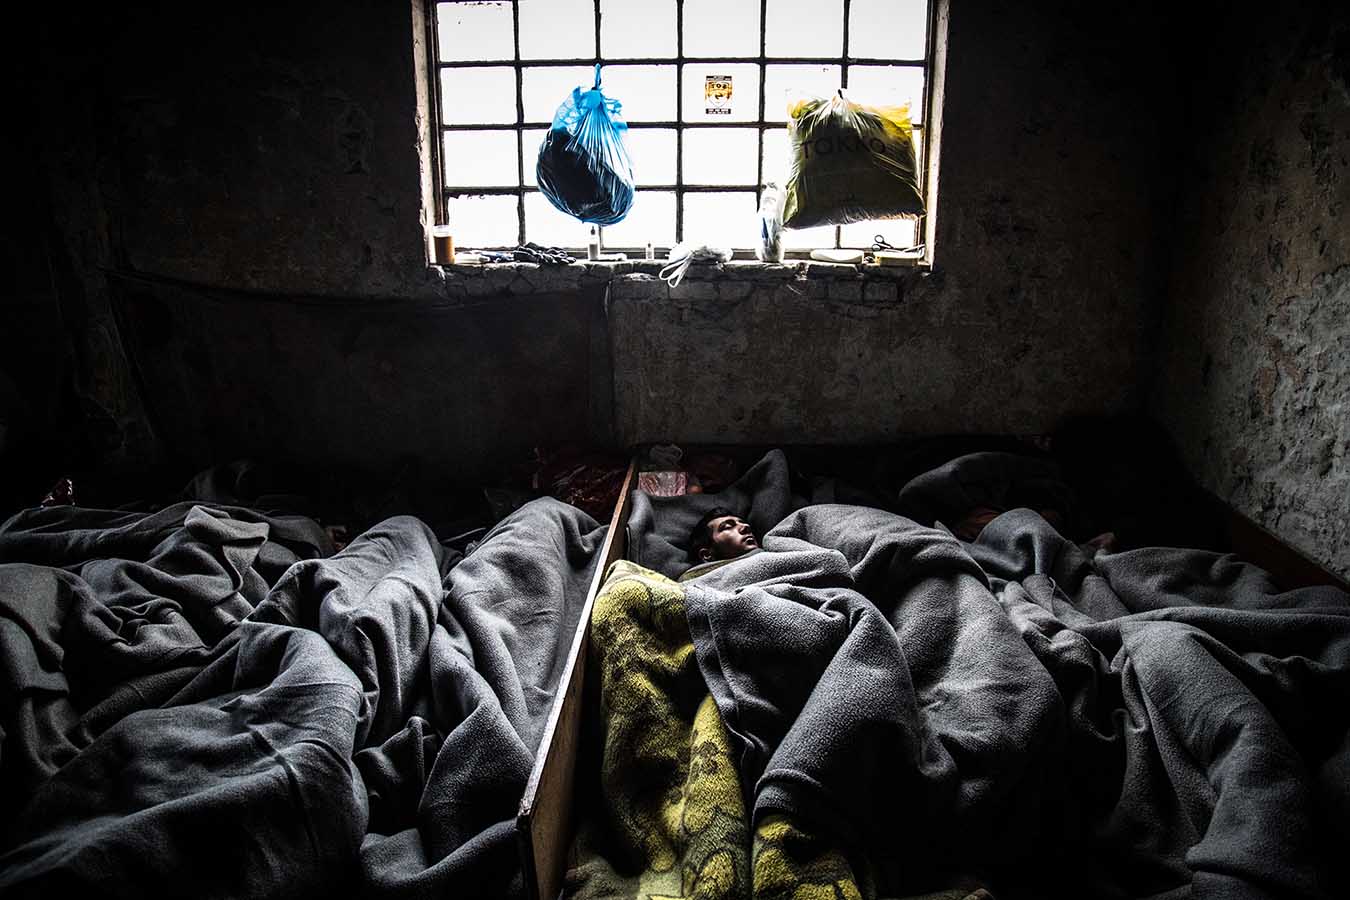  Refugees sleep rough, inside one of the abandoned warehouses in the area of Belgrade's central station, where nearly 1,300 have found refuge from the harsh Serbian winter as they way to cross into Northern and Central Europe.  